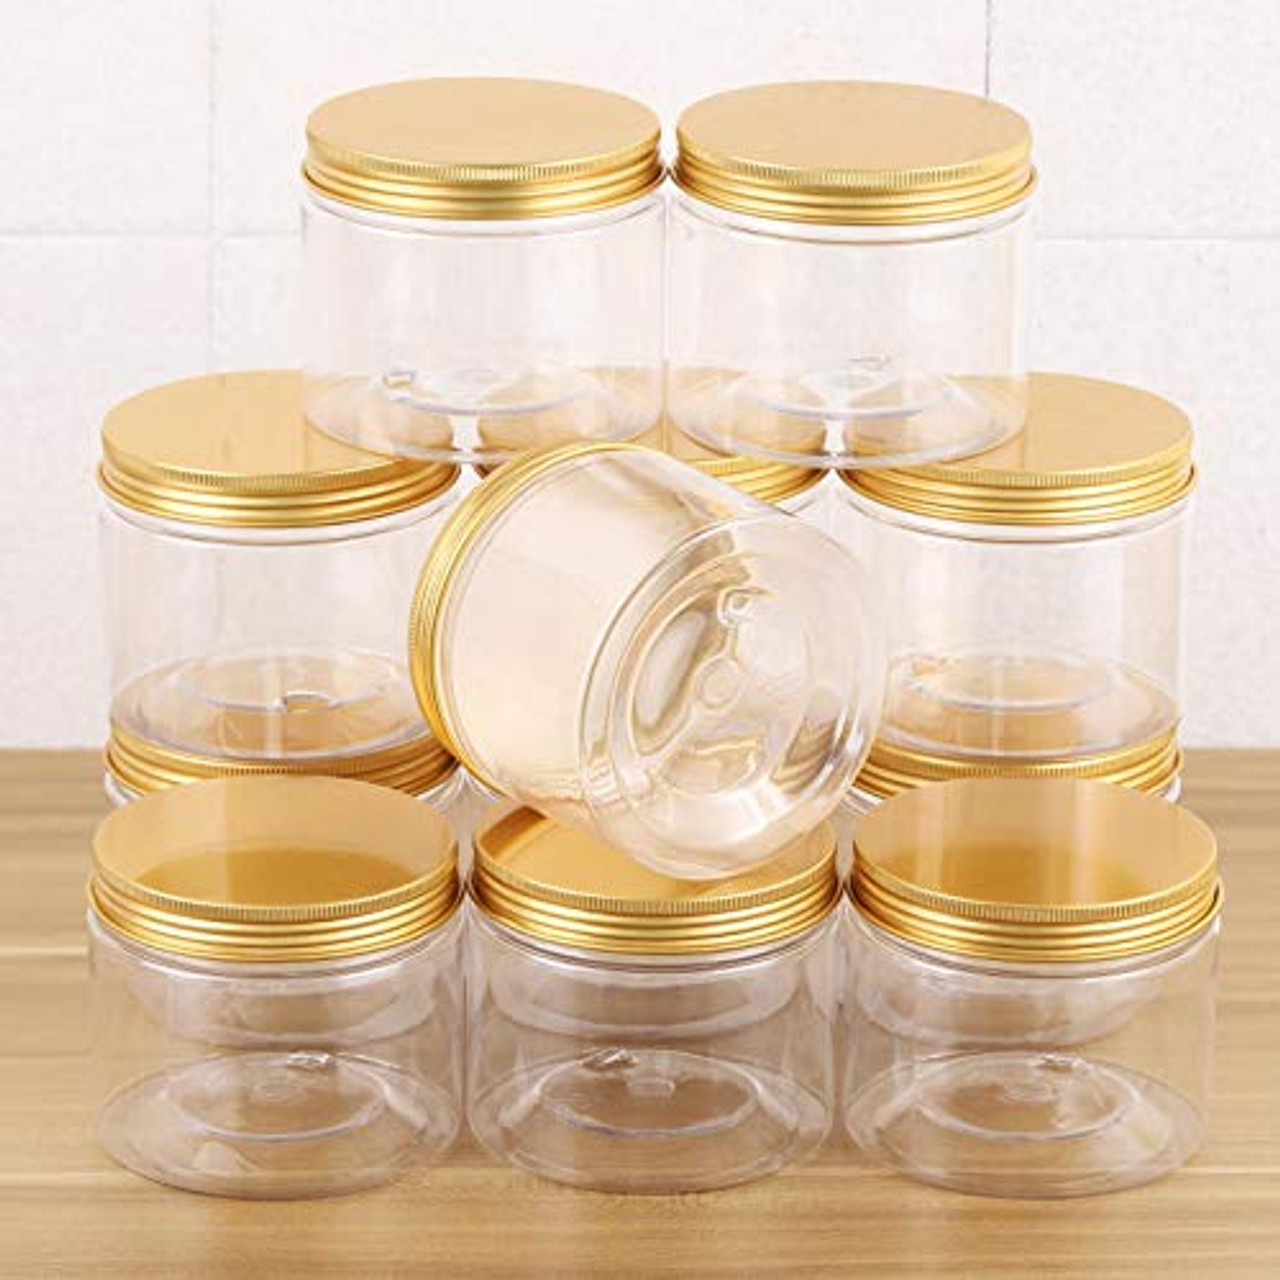 Wholesale BENECREAT 9 PACK 300ml Empty Clear Plastic Slime Storage Favor  Jars Wide-mouth Plastic Containers for display 